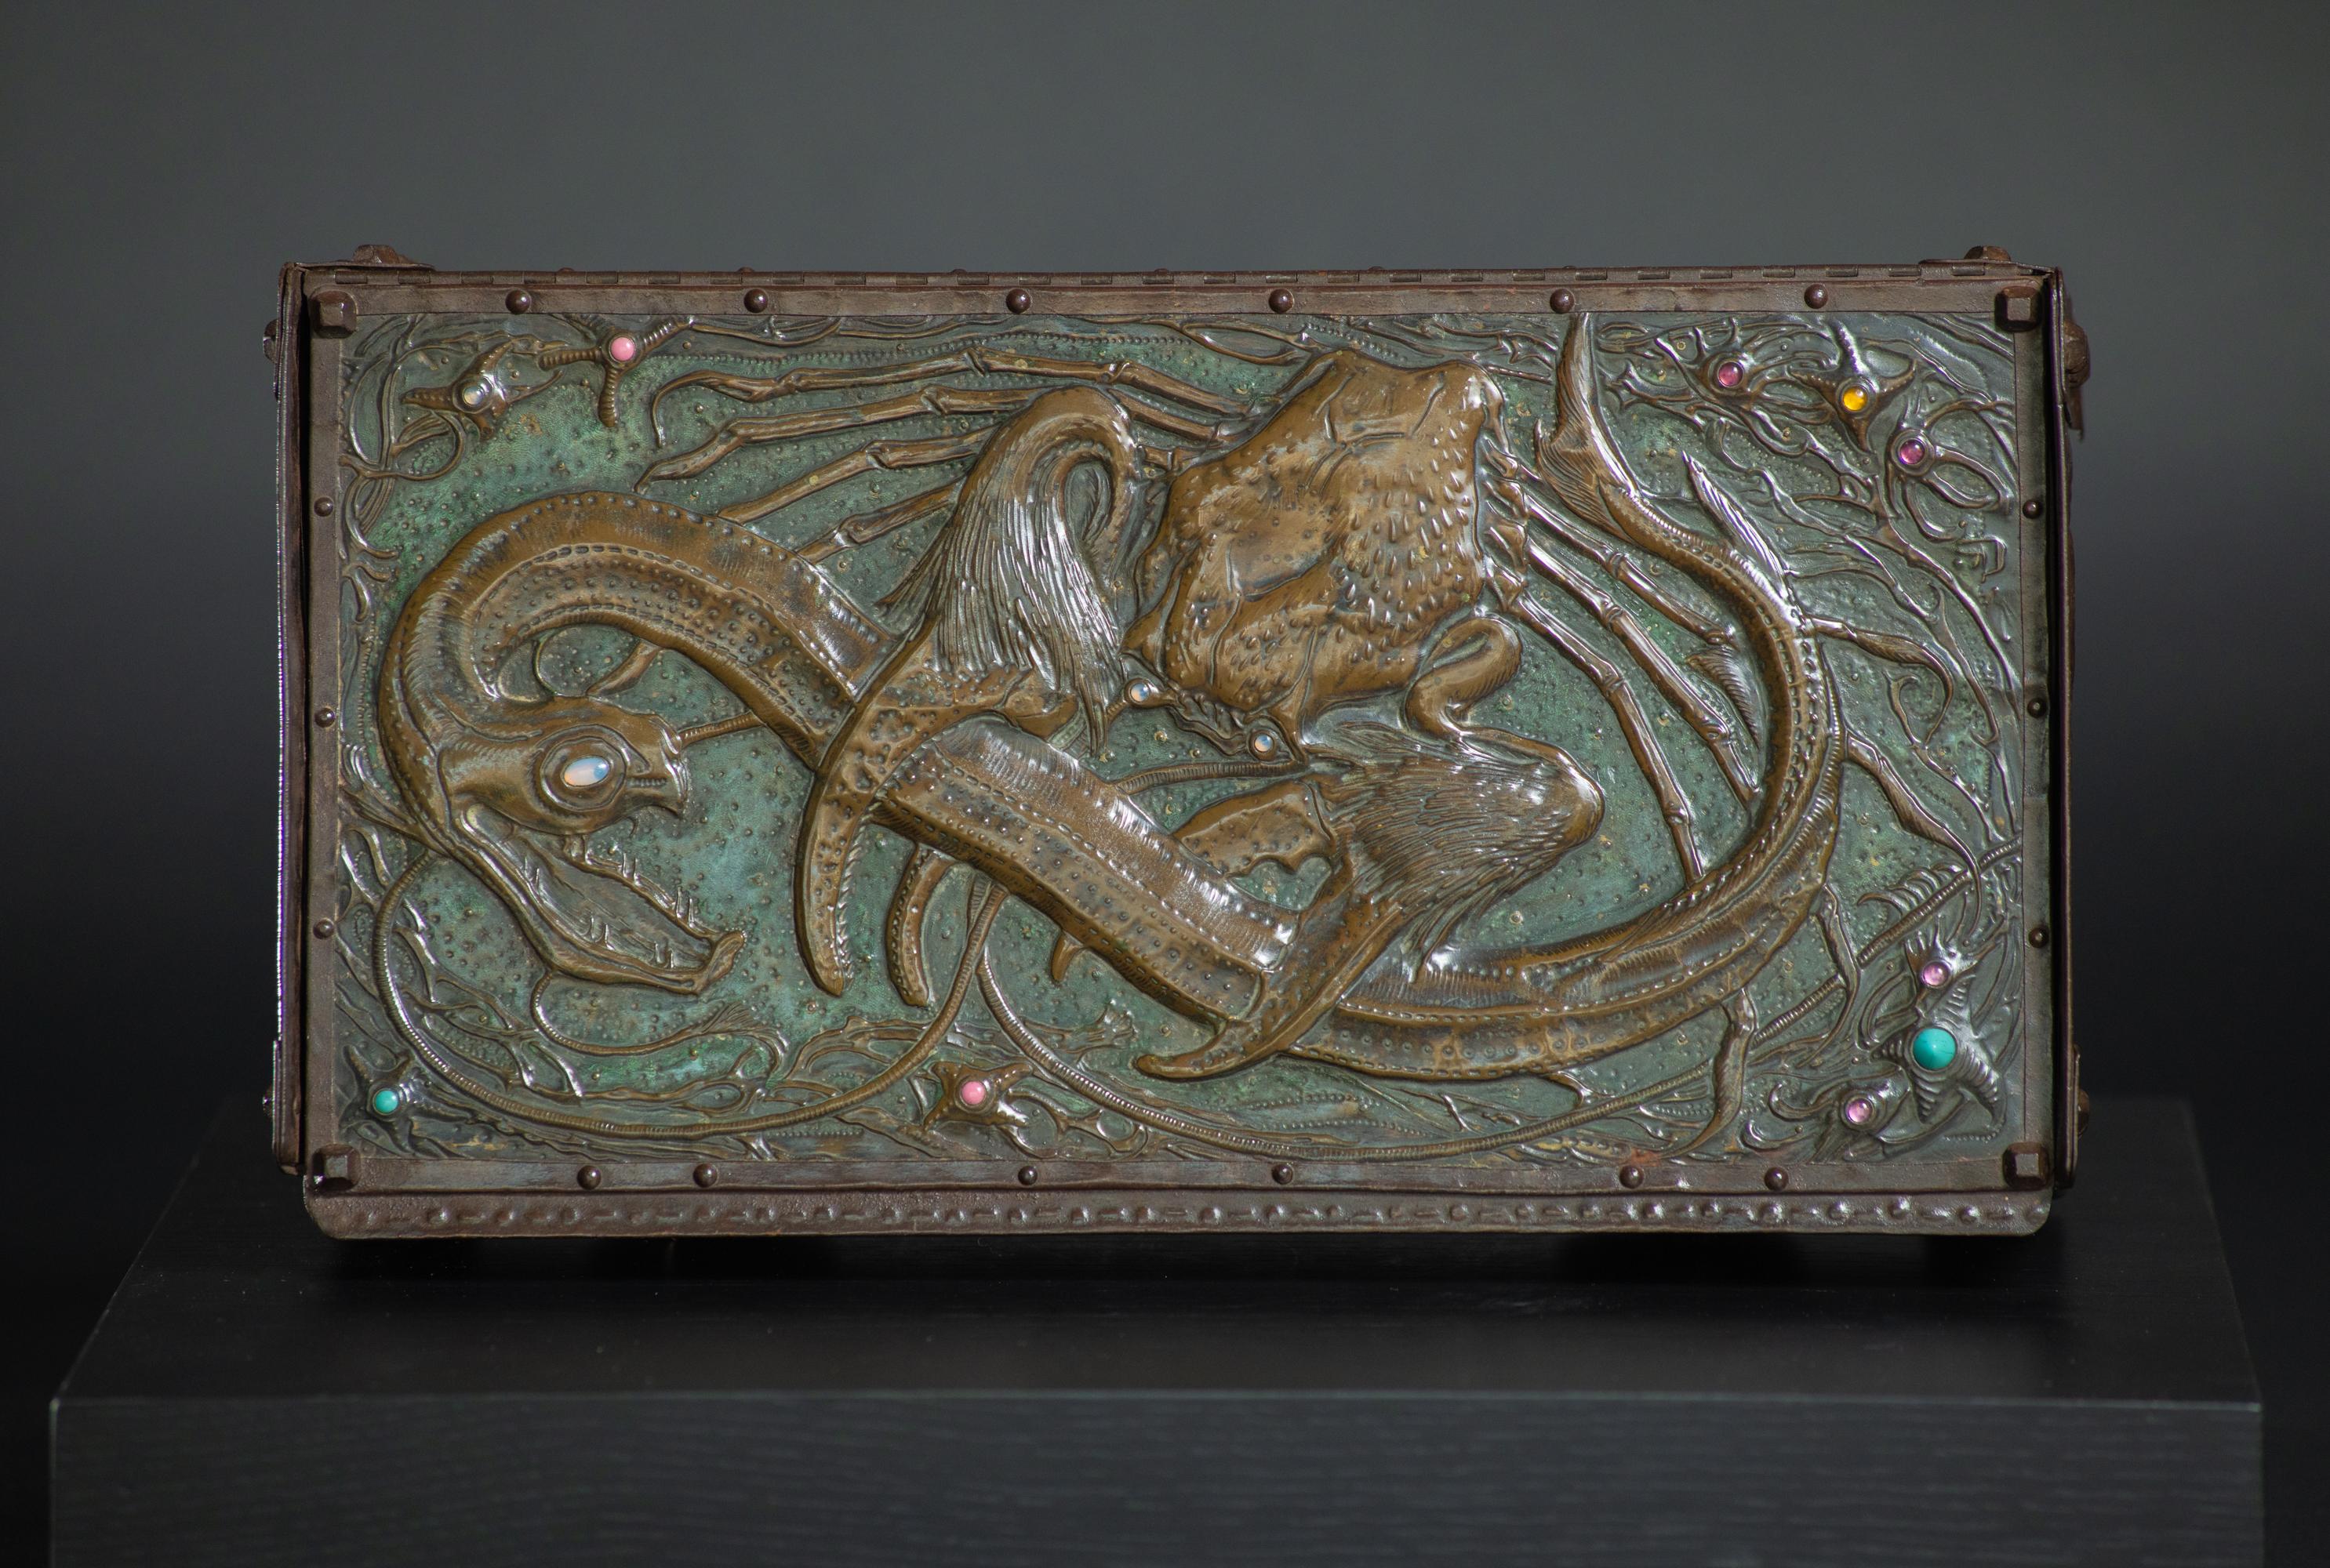 Daguet’s beautifully patinated box is a rich textural and colorful tour de force. The top of Daguet’s box is striking for its bird’s-eye-view of a crab clutching a viper eel. Using repousse and chasing techniques, Daguet creates dimension and a